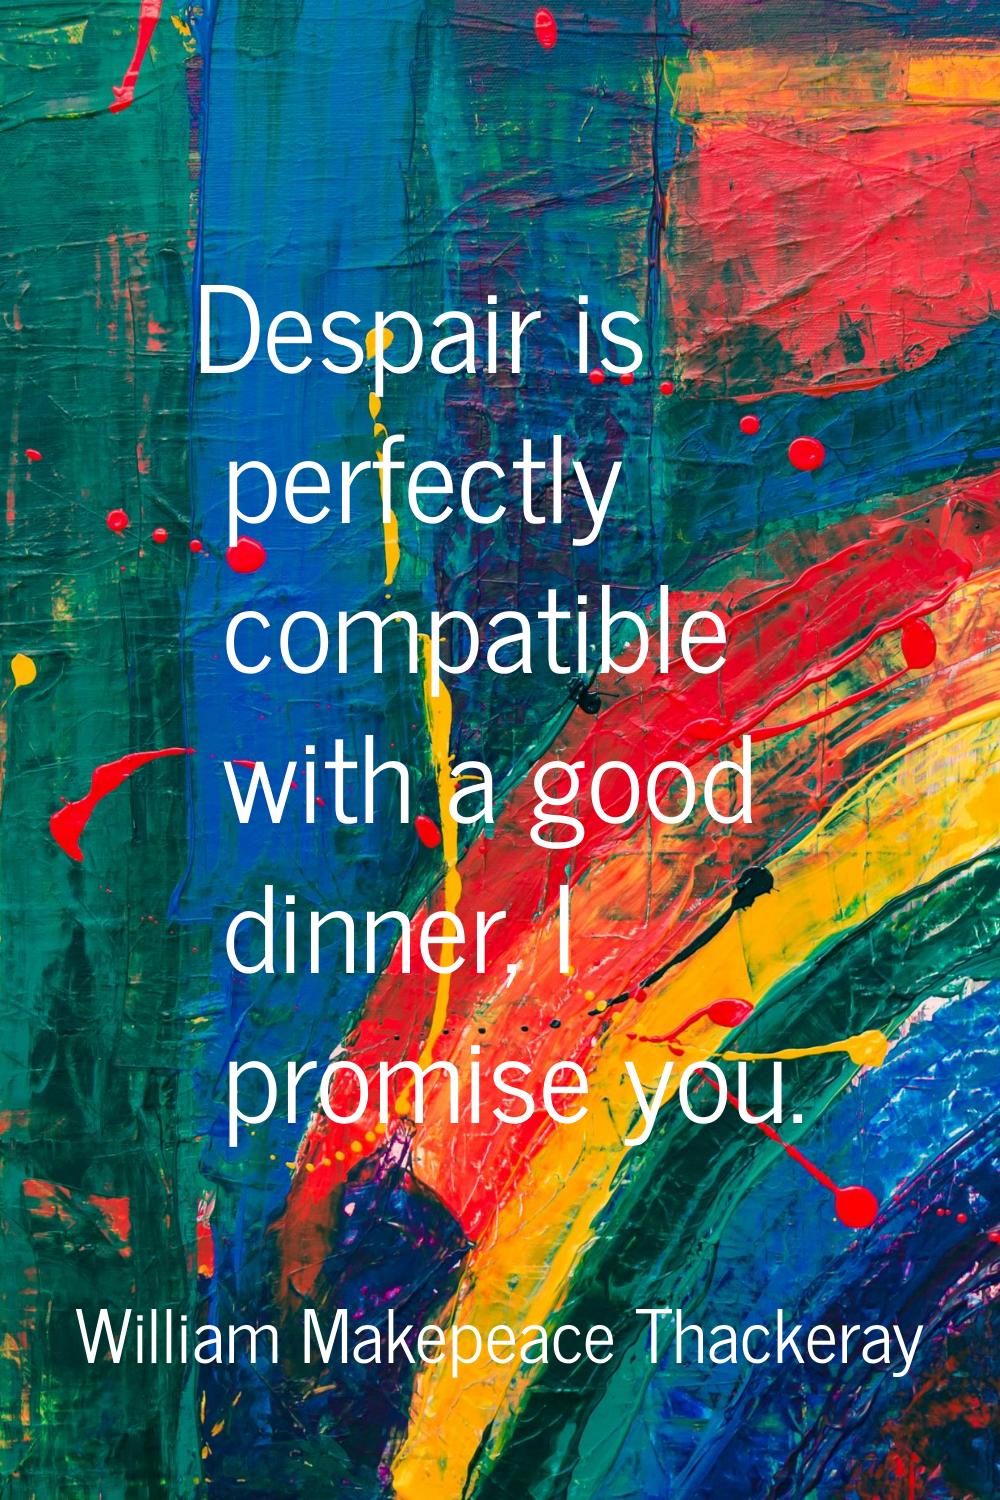 Despair is perfectly compatible with a good dinner, I promise you.